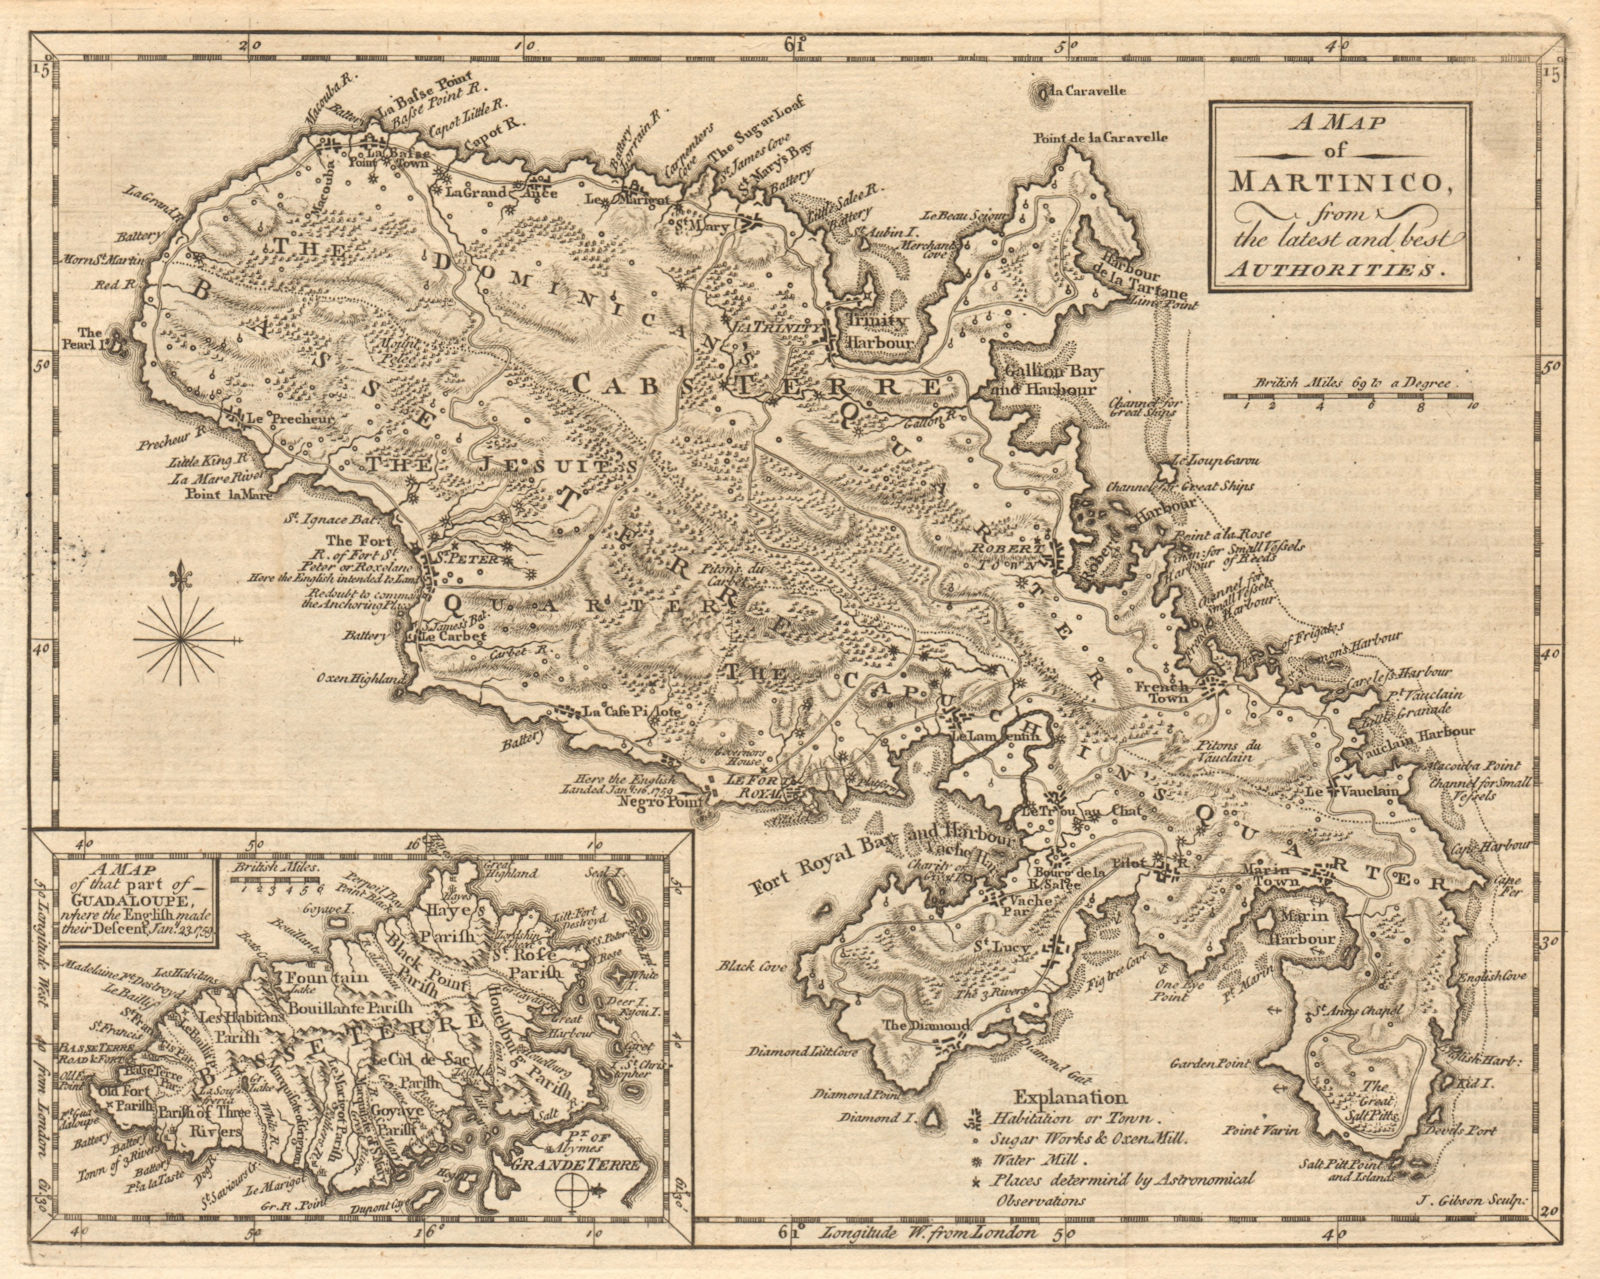 Associate Product Martinico & Basse-Terre, Guadeloupe. Martinique. Antilles. GIBSON 1759 old map